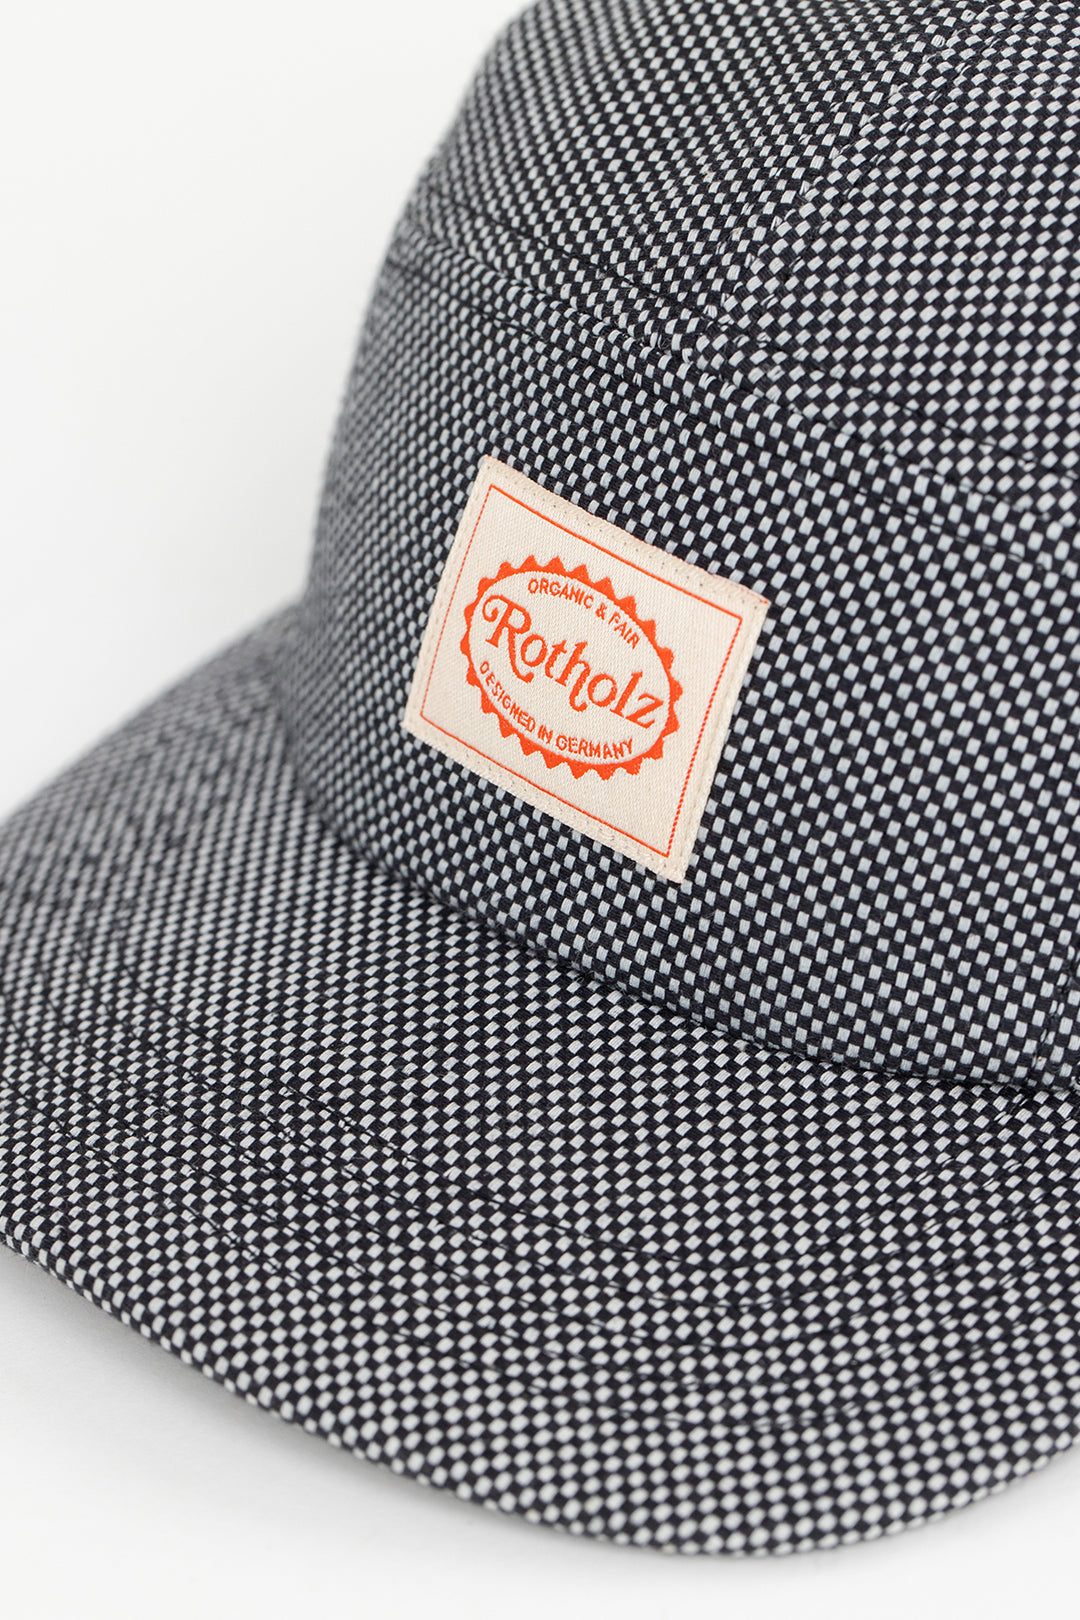 Black and white, checked retro 5-panel cap made of 100% organic cotton from Rotholz